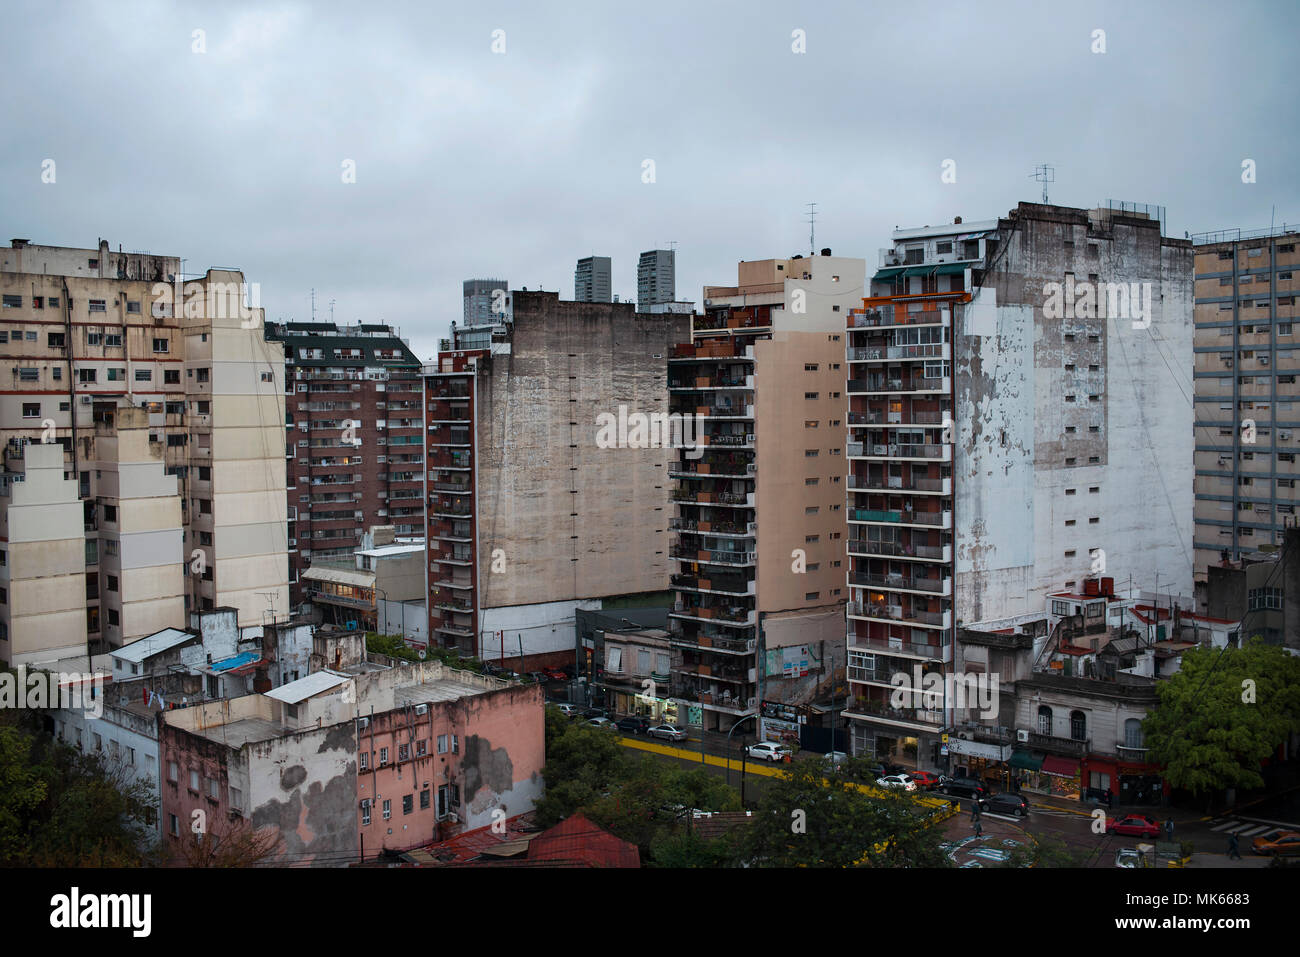 Scenic urban view over the buildings from Ancon Street, near Palermo district, Buenos Aires, Argentina. May 2018 Stock Photo